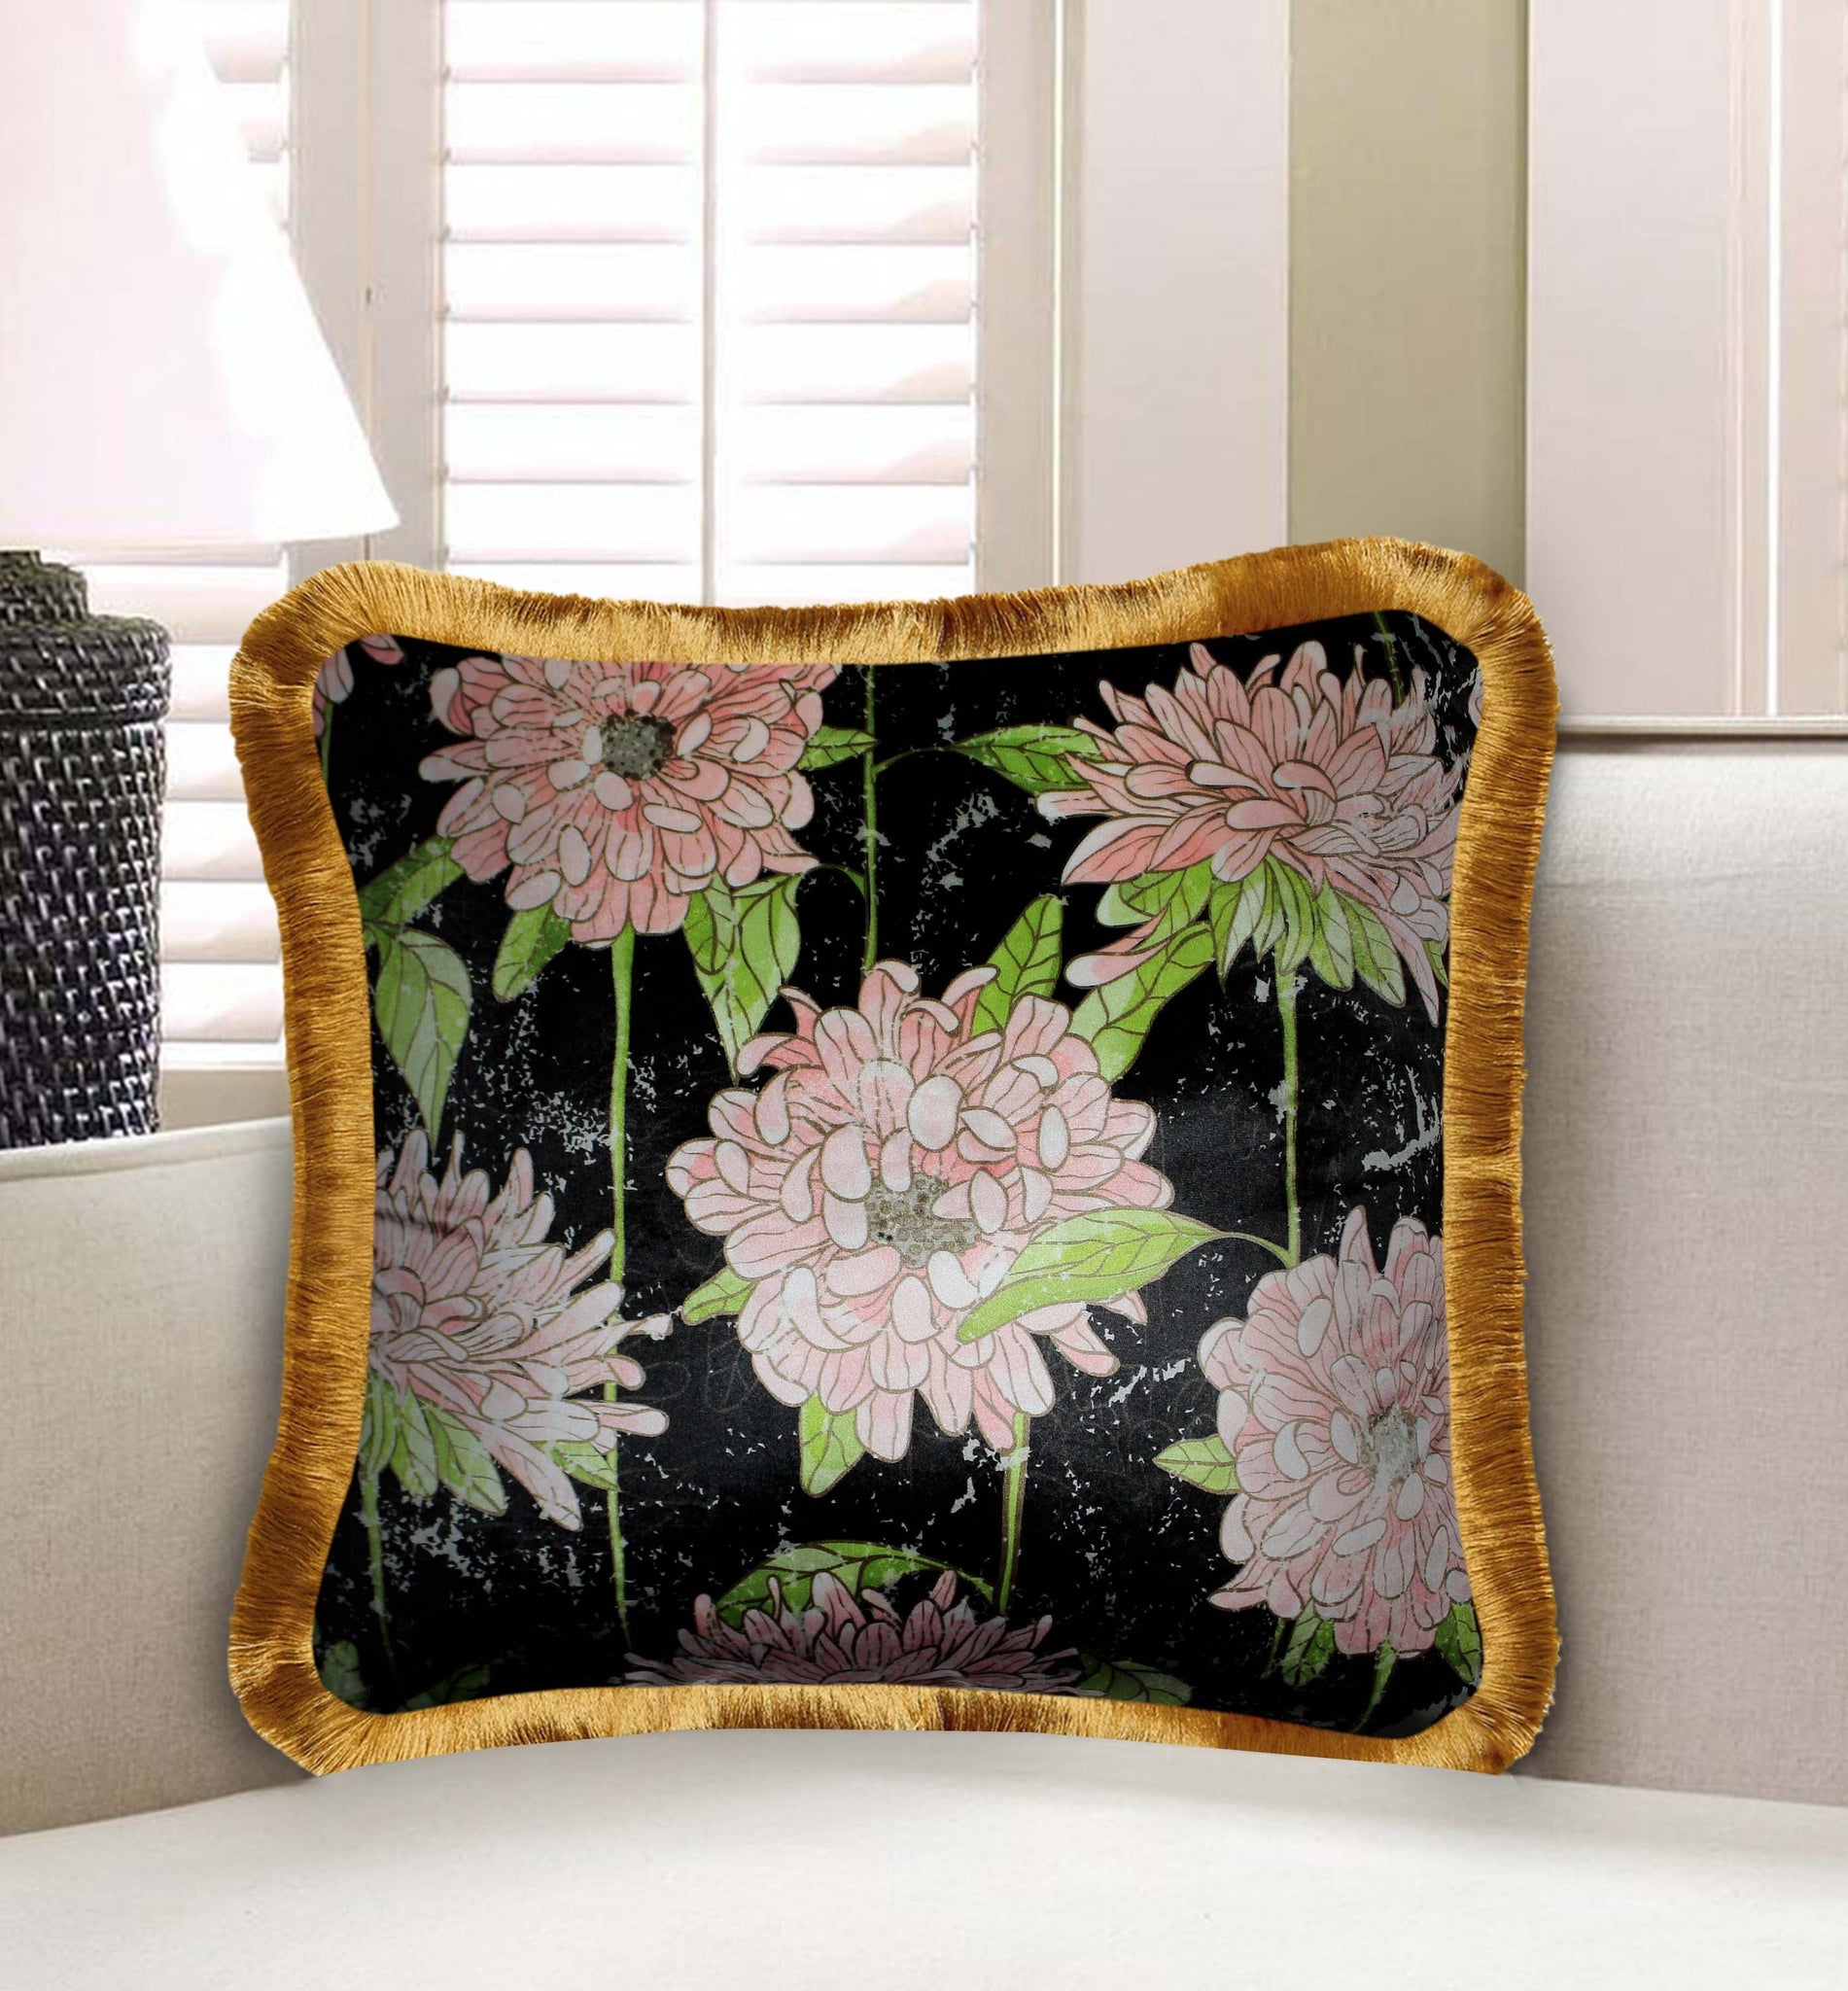 Velvet Cushion Cover Exotic Flower Decorative pillowcase Floral and Leaf Décor Throw Pillow for Sofa Chair Bedroom Living Room Multi Color 45x45cm (18x18 Inches)